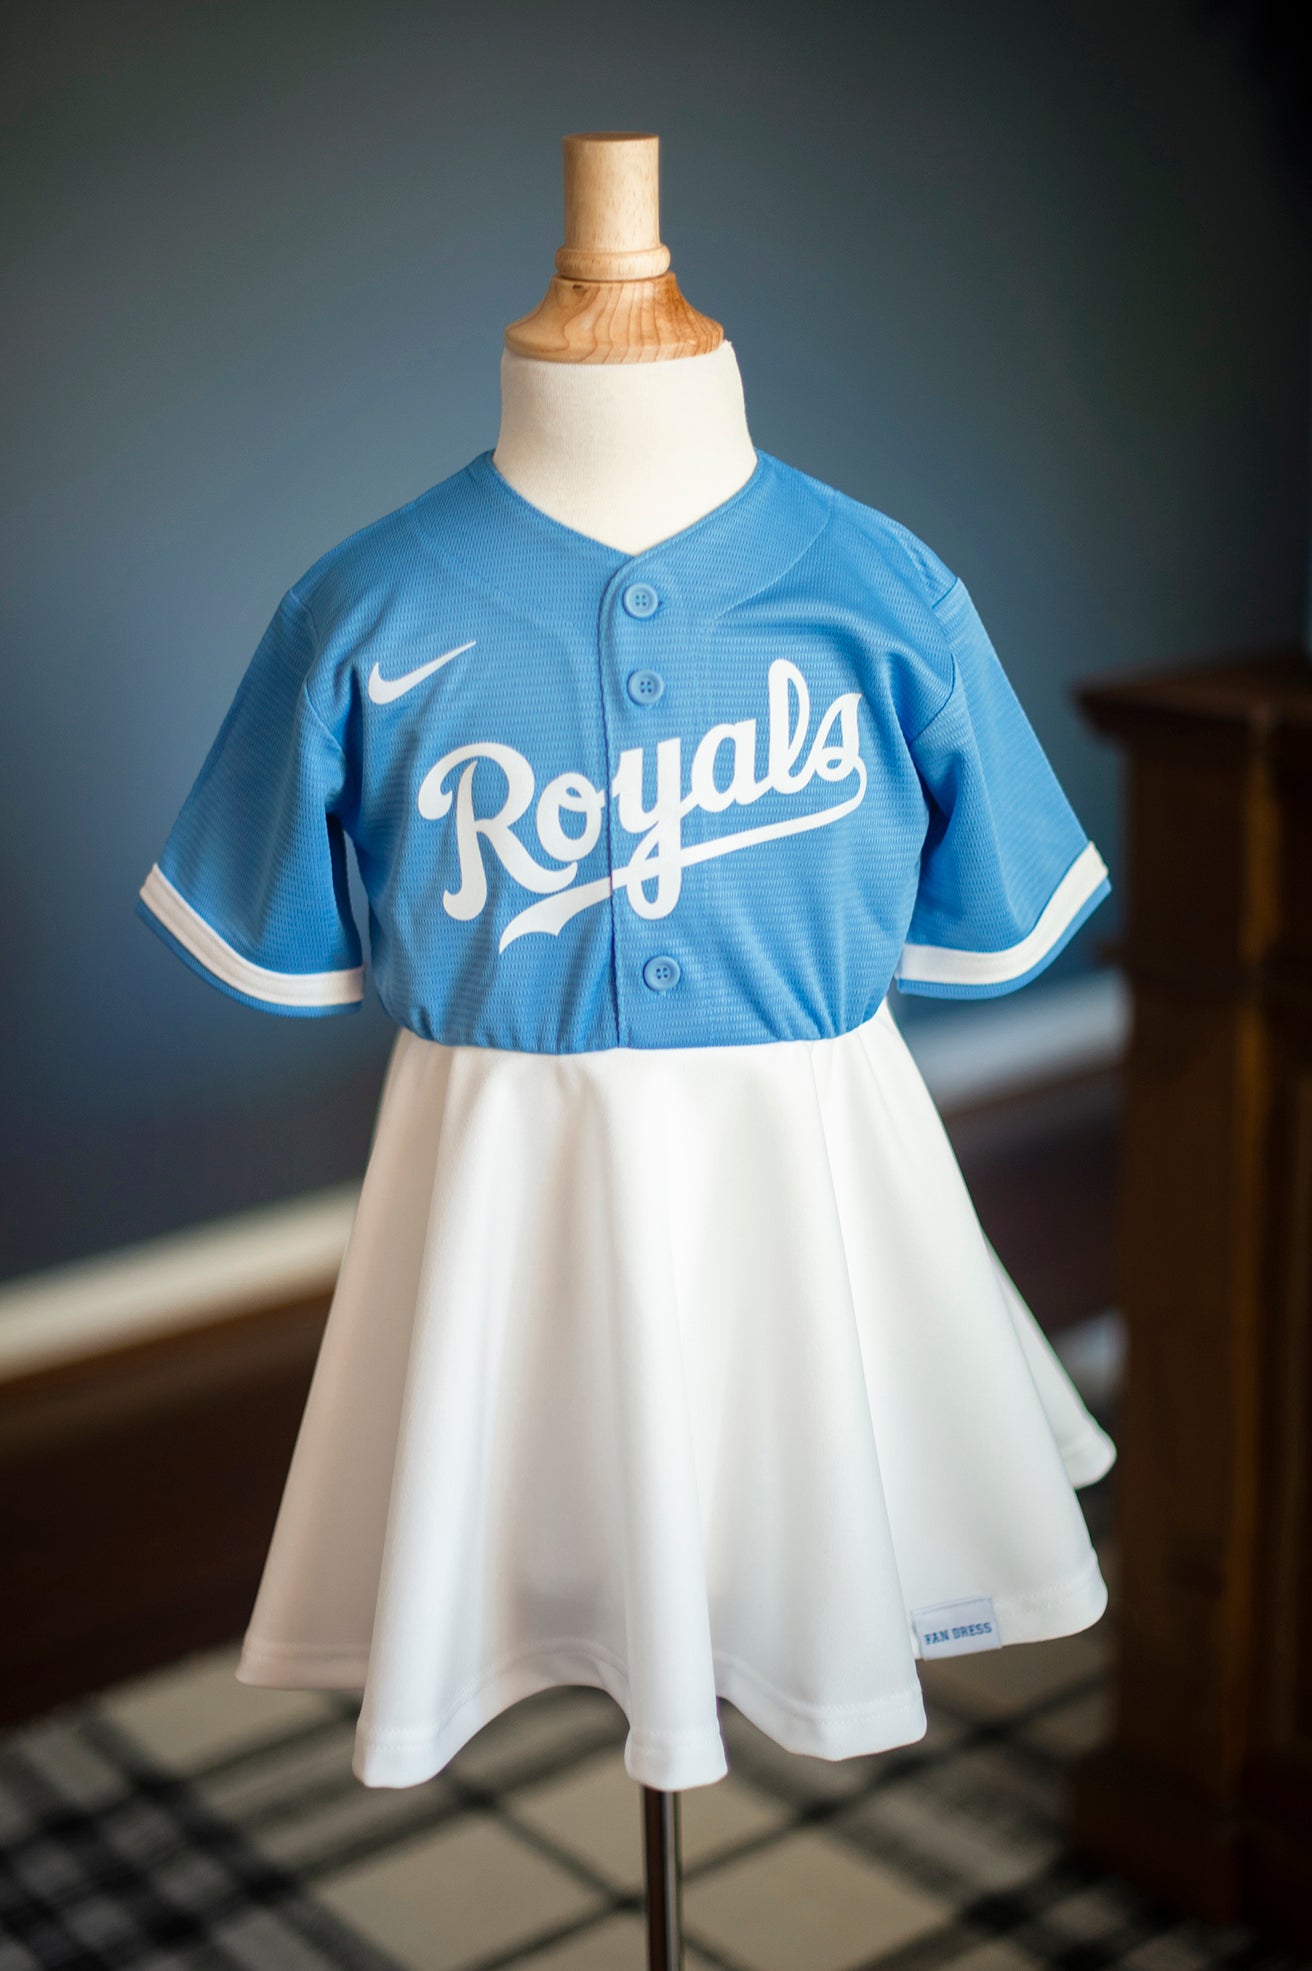 Nike Kansas City Royals Personalized Youth Home Jersey